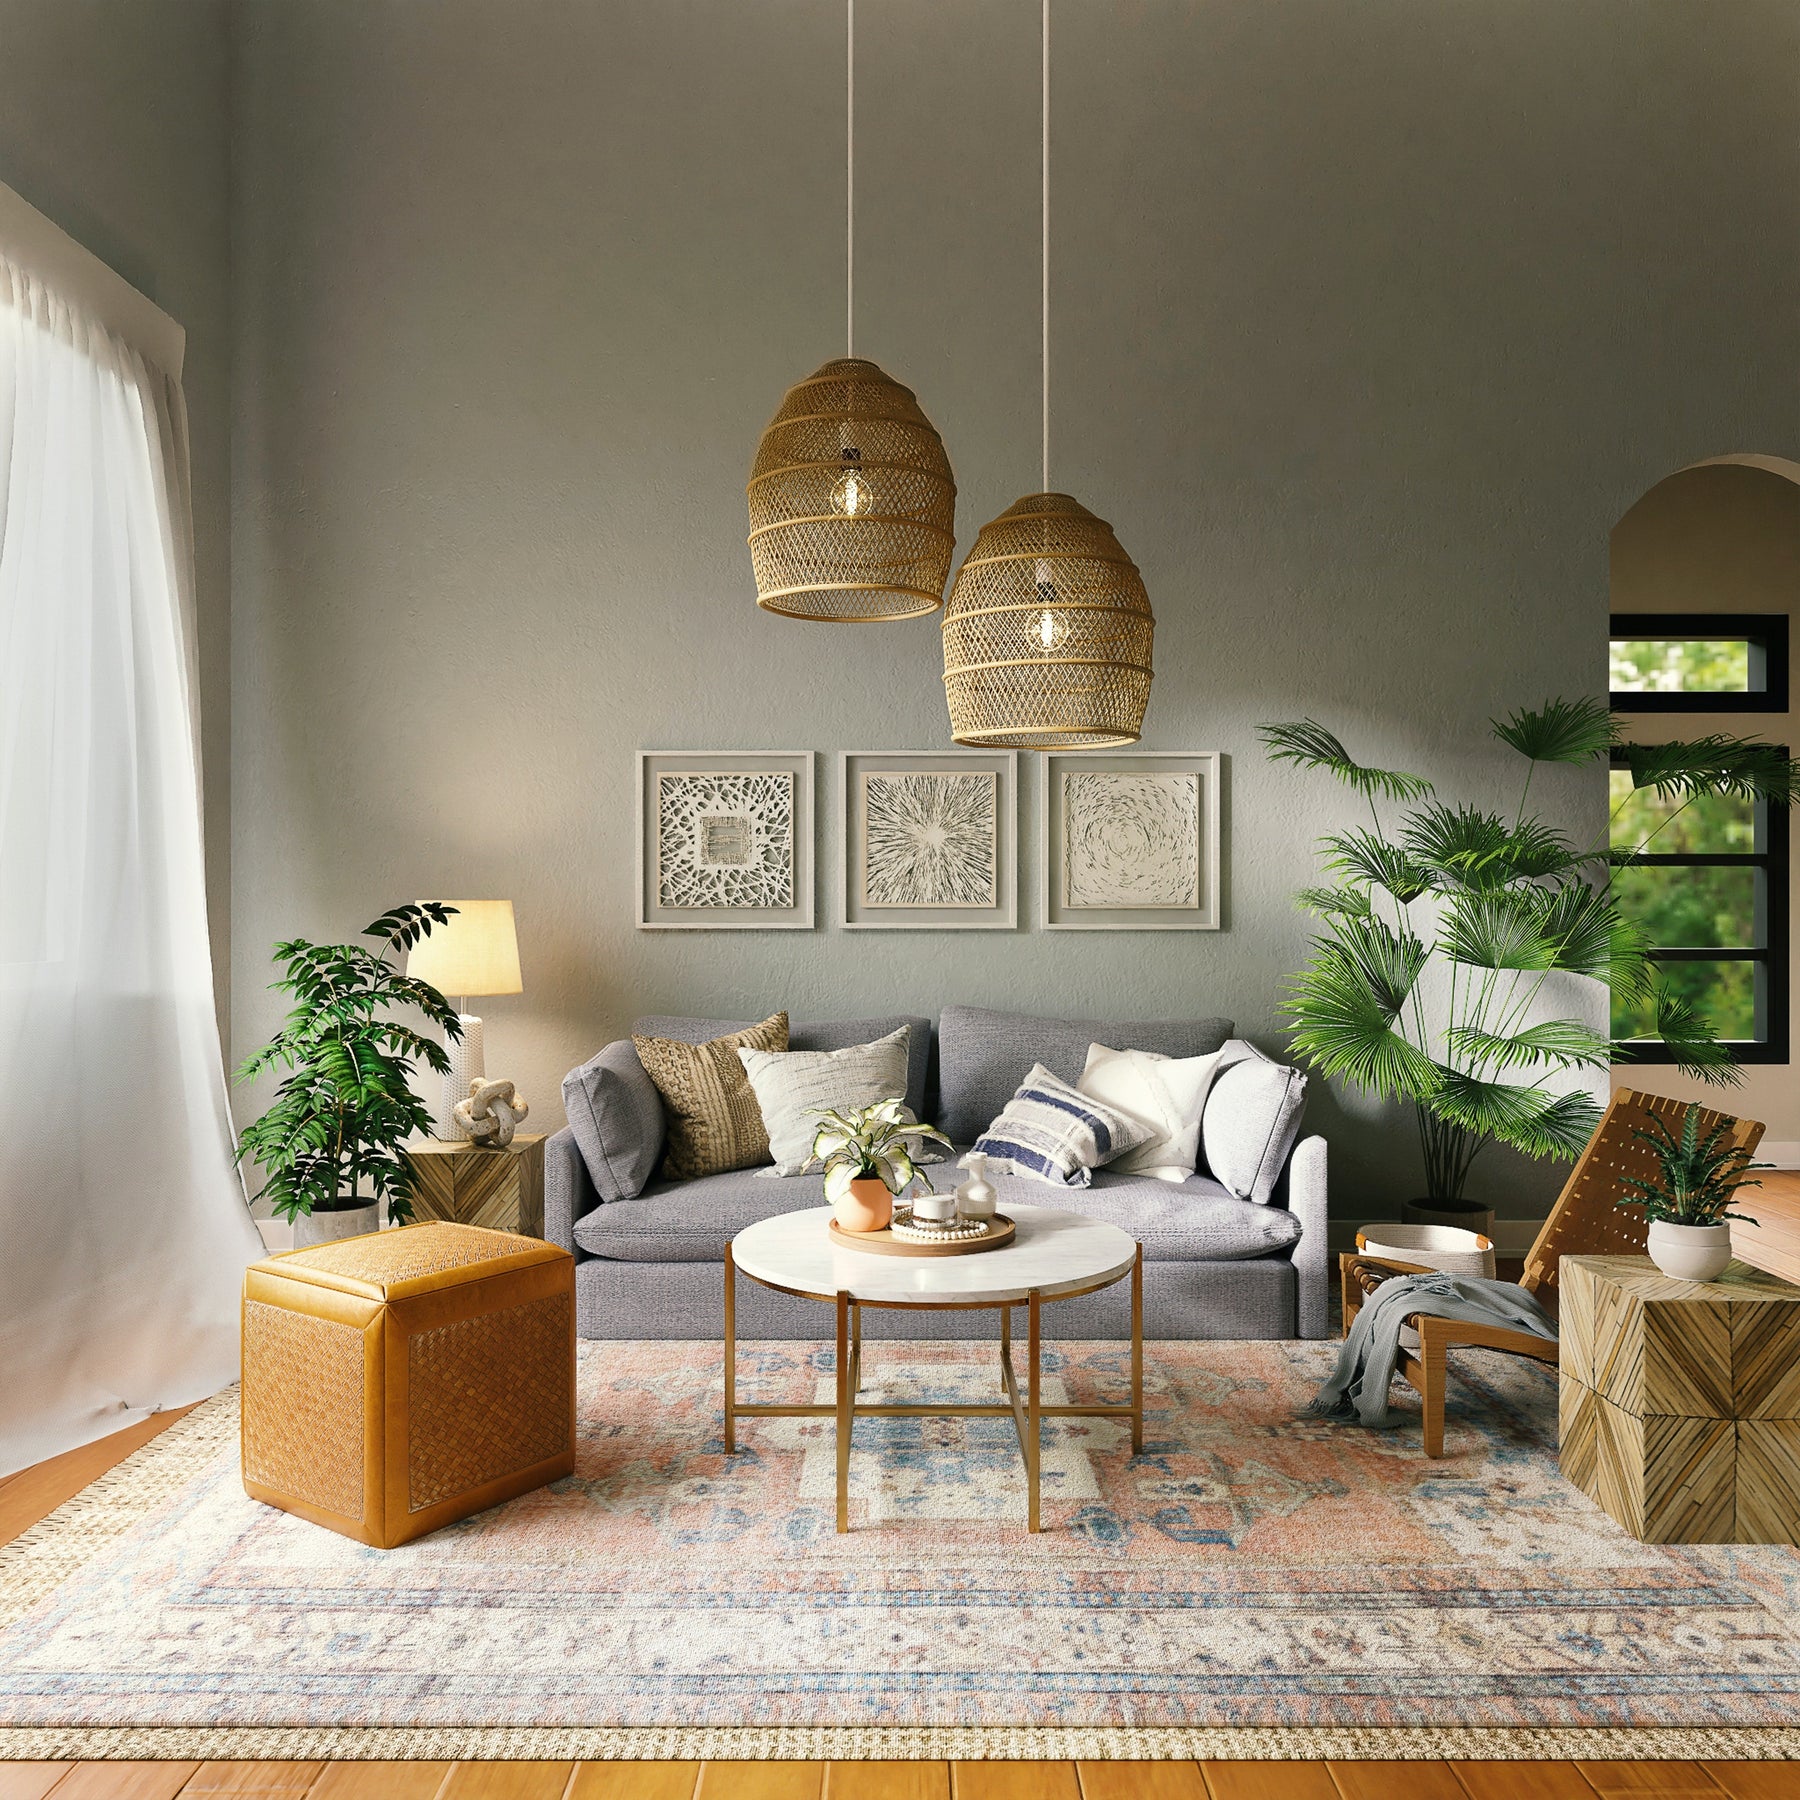 Living room with pendant lights